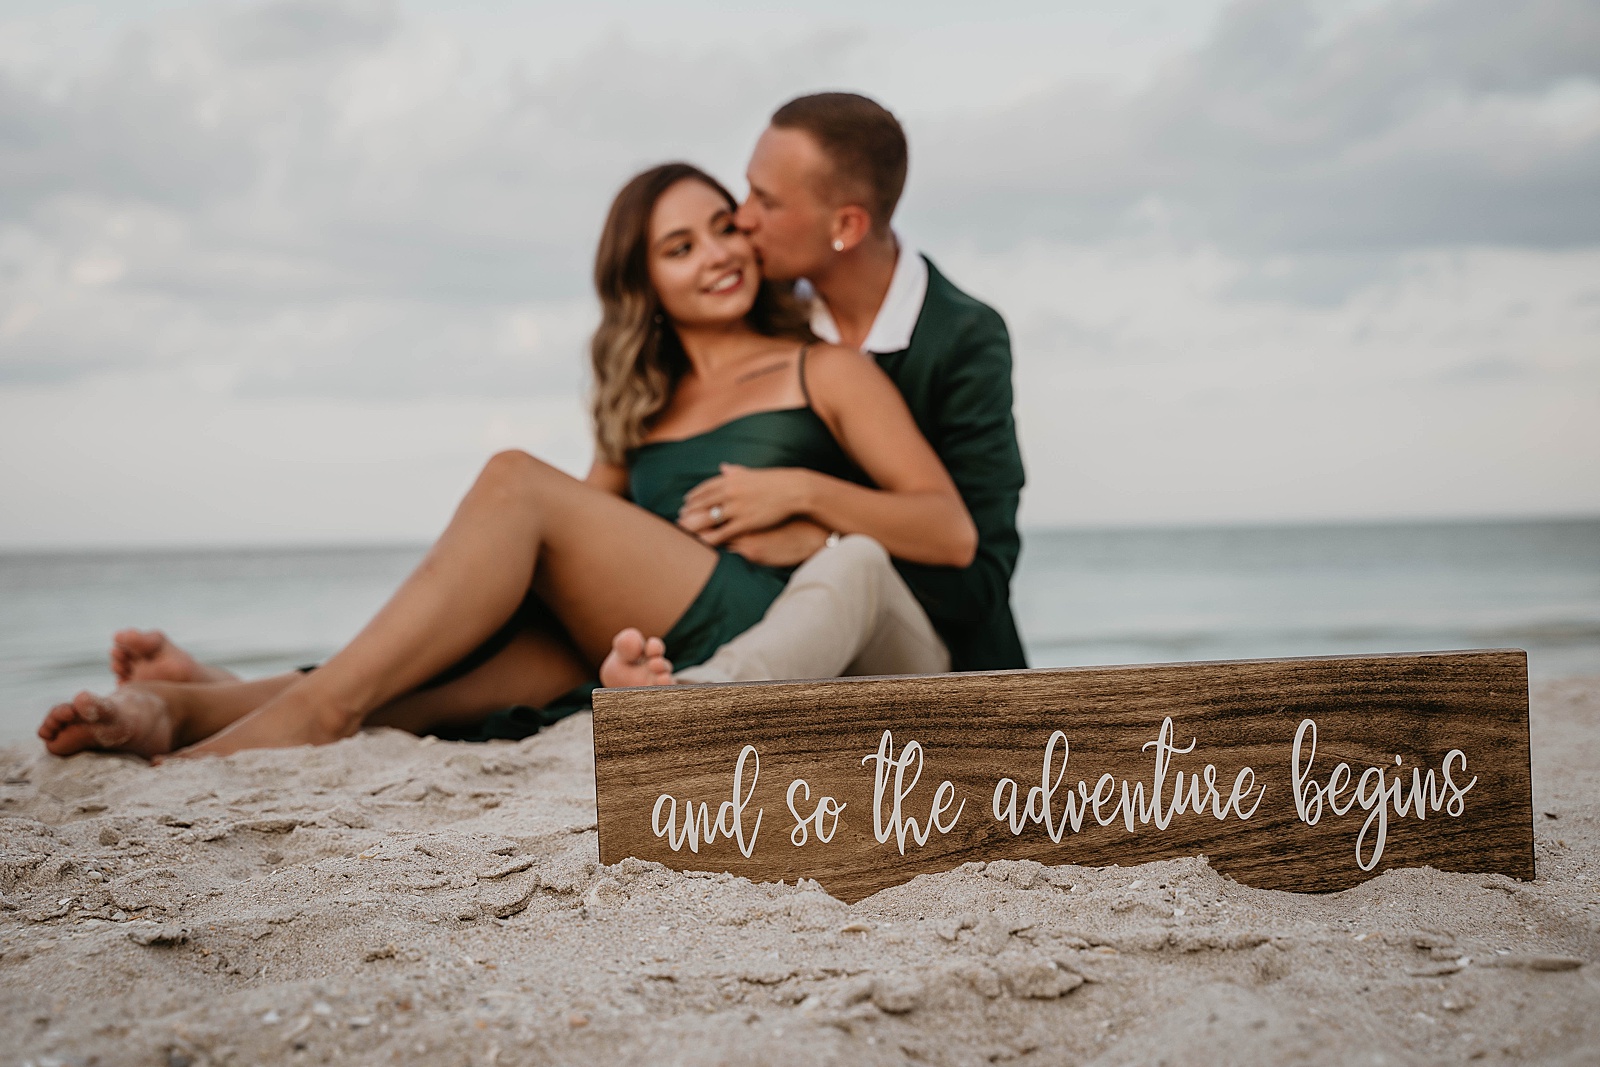 Palm Beach Engagement Session Couple in Green by West Palm Beach Engagement Photographer, Krystal Capone Photography